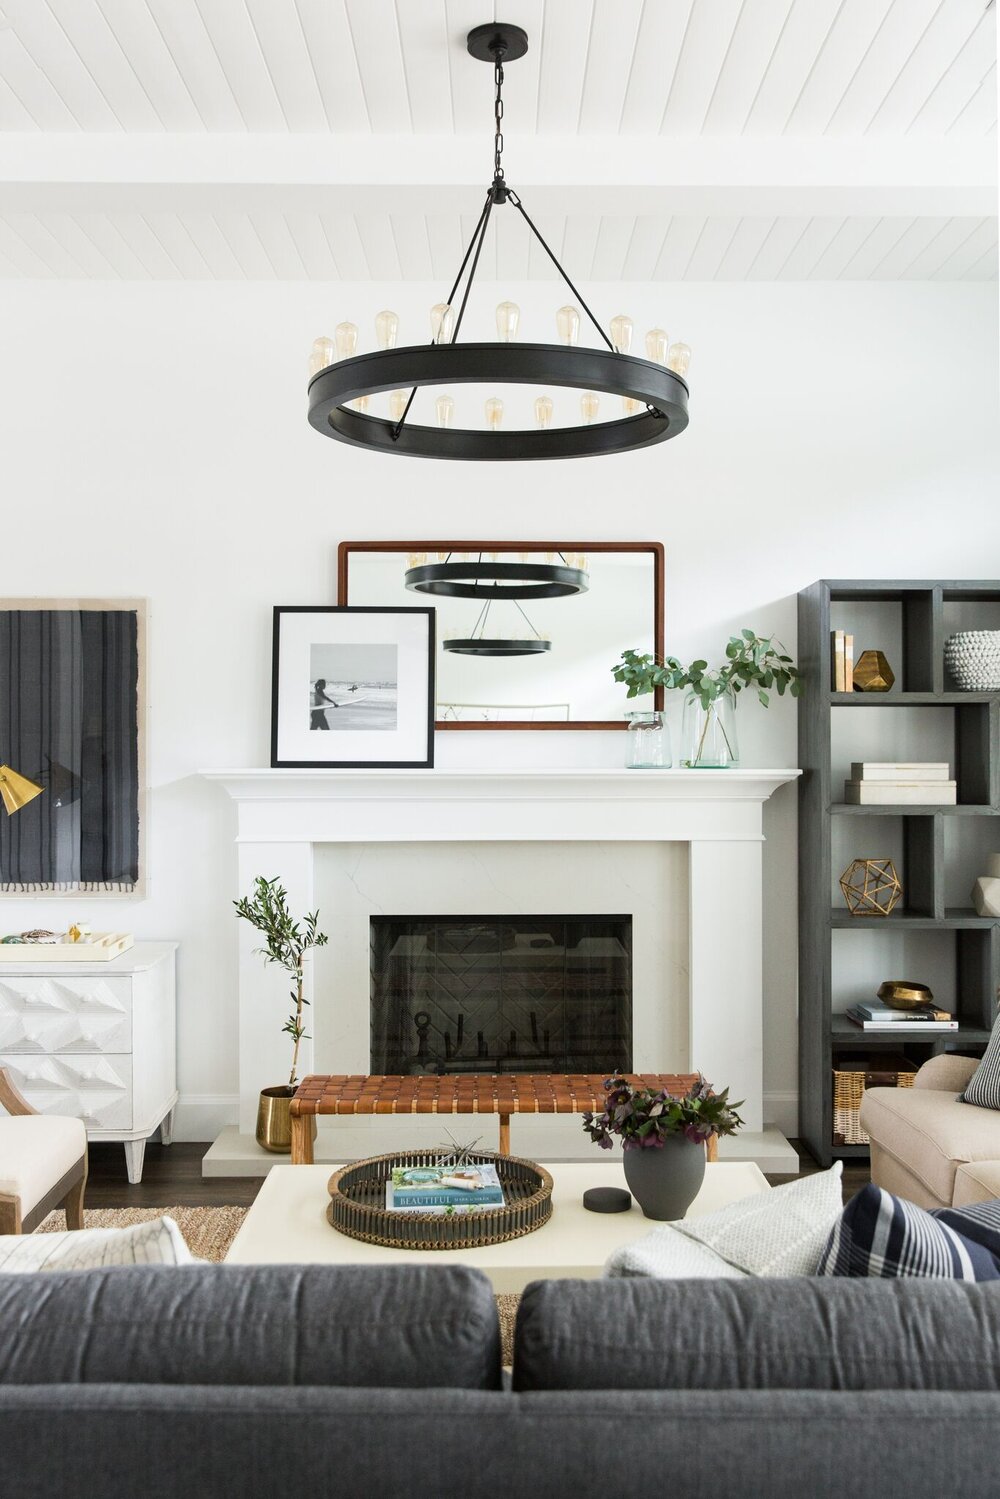 Add a Pendant Lamp to the Fireplace